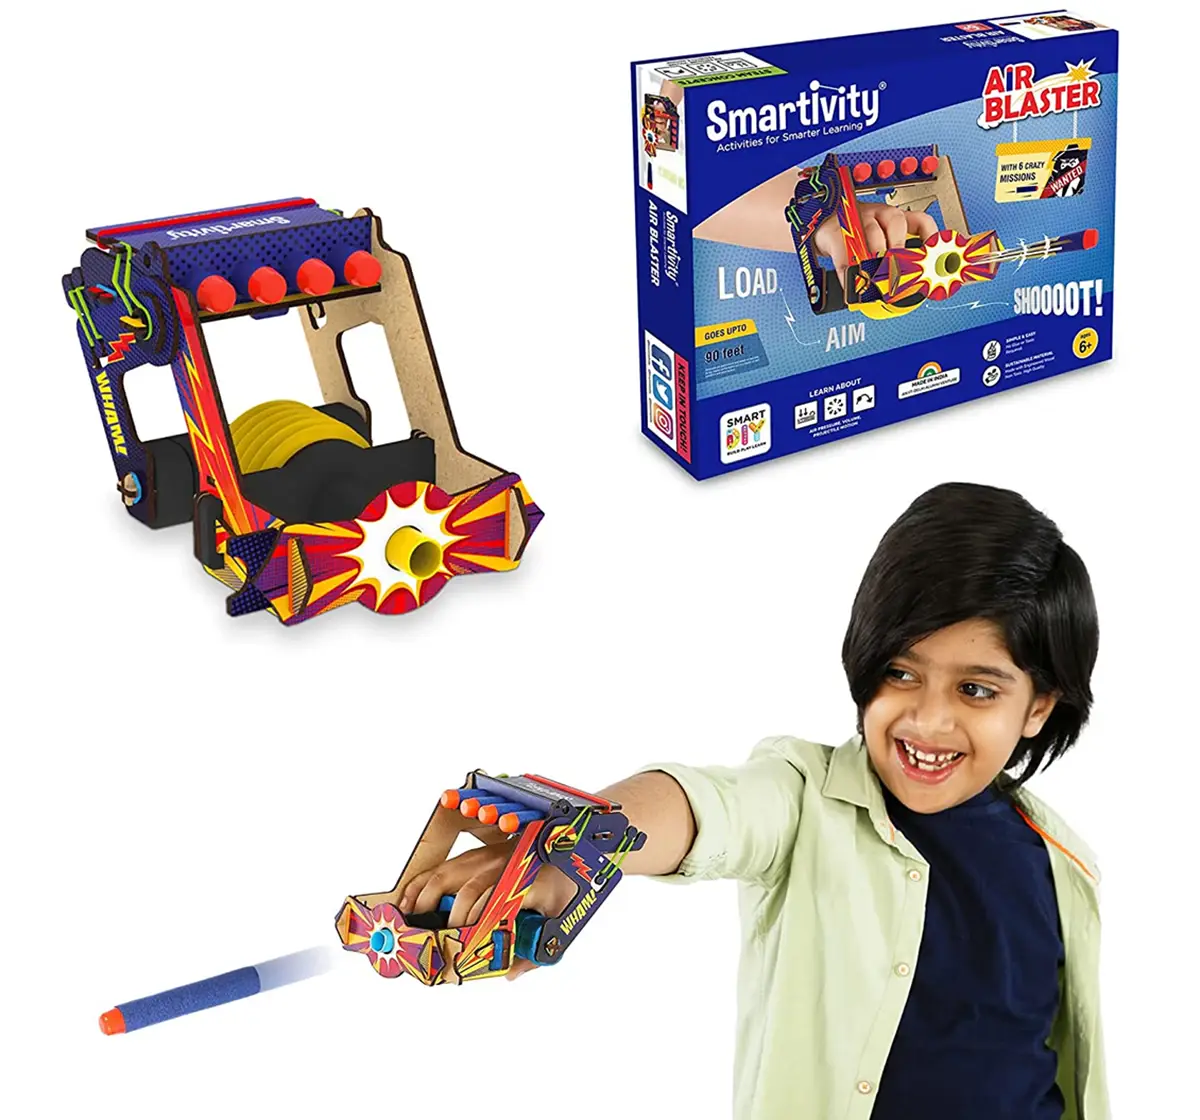 Smartivity Air Blaster Science STEM DIY Fun Toy Gun, Educational & Construction Based Activity Game for Kids 6 to 14
